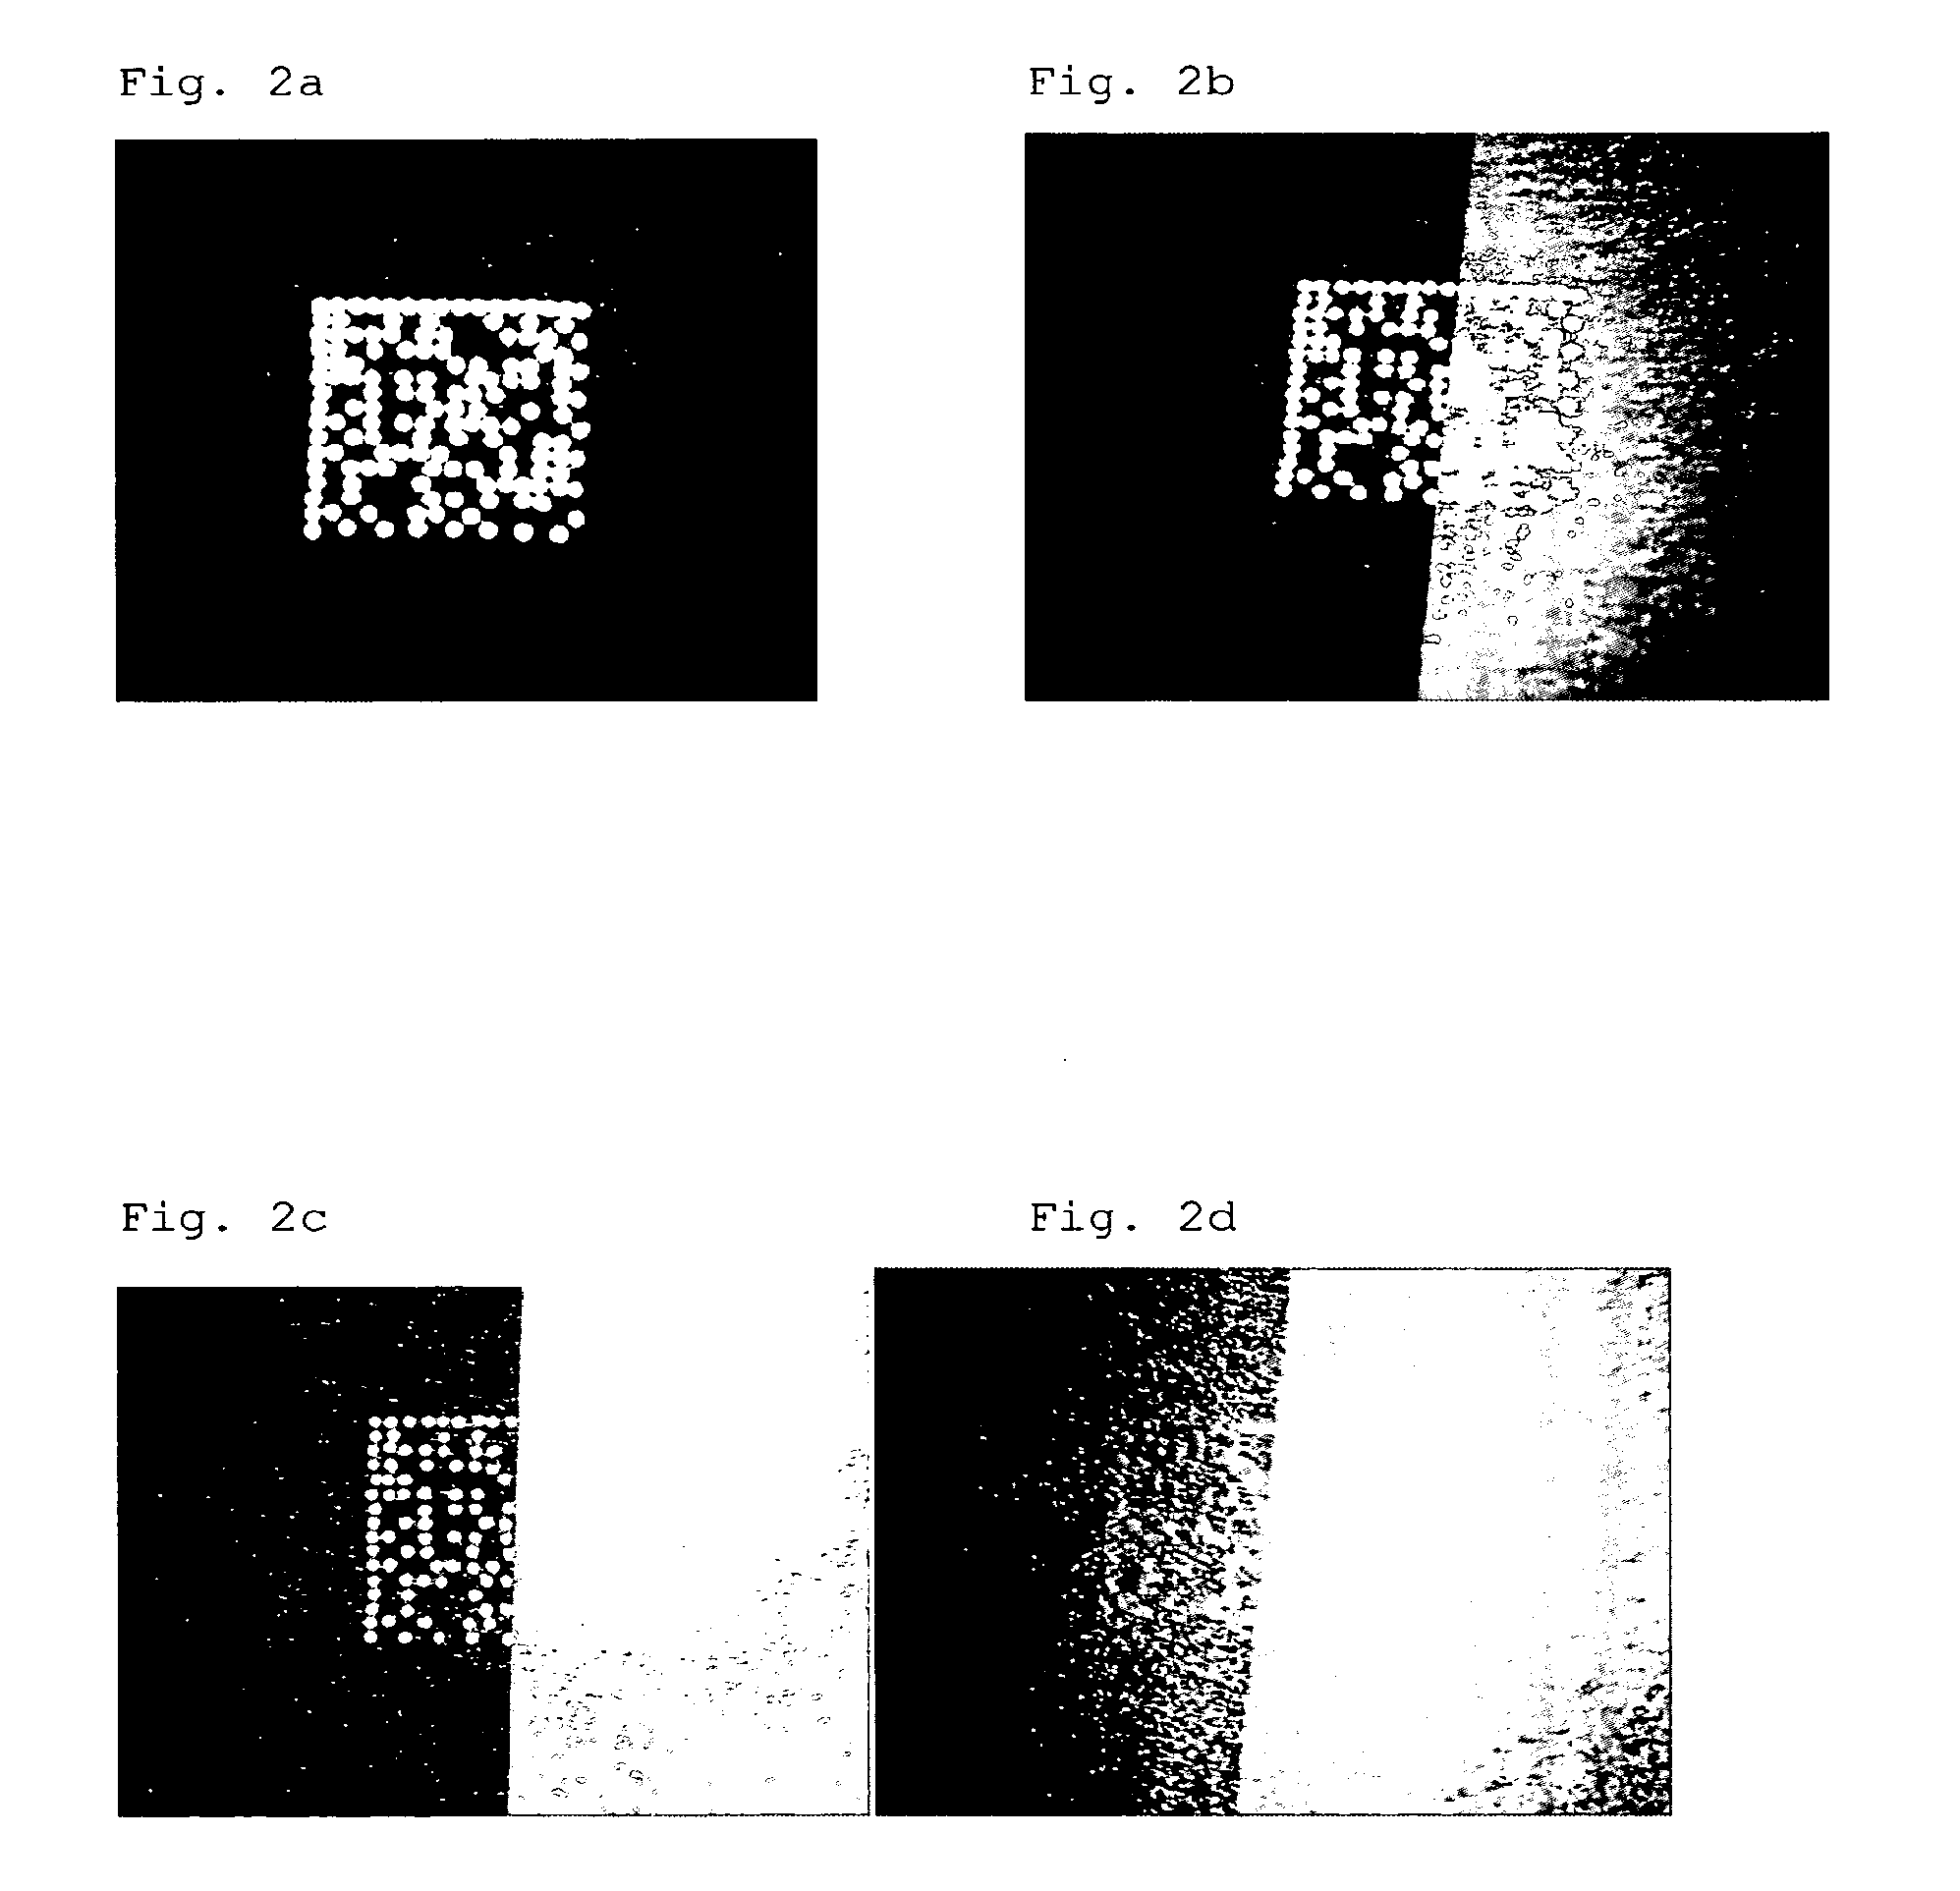 Identification and authentication using polymeric liquid crystal material markings